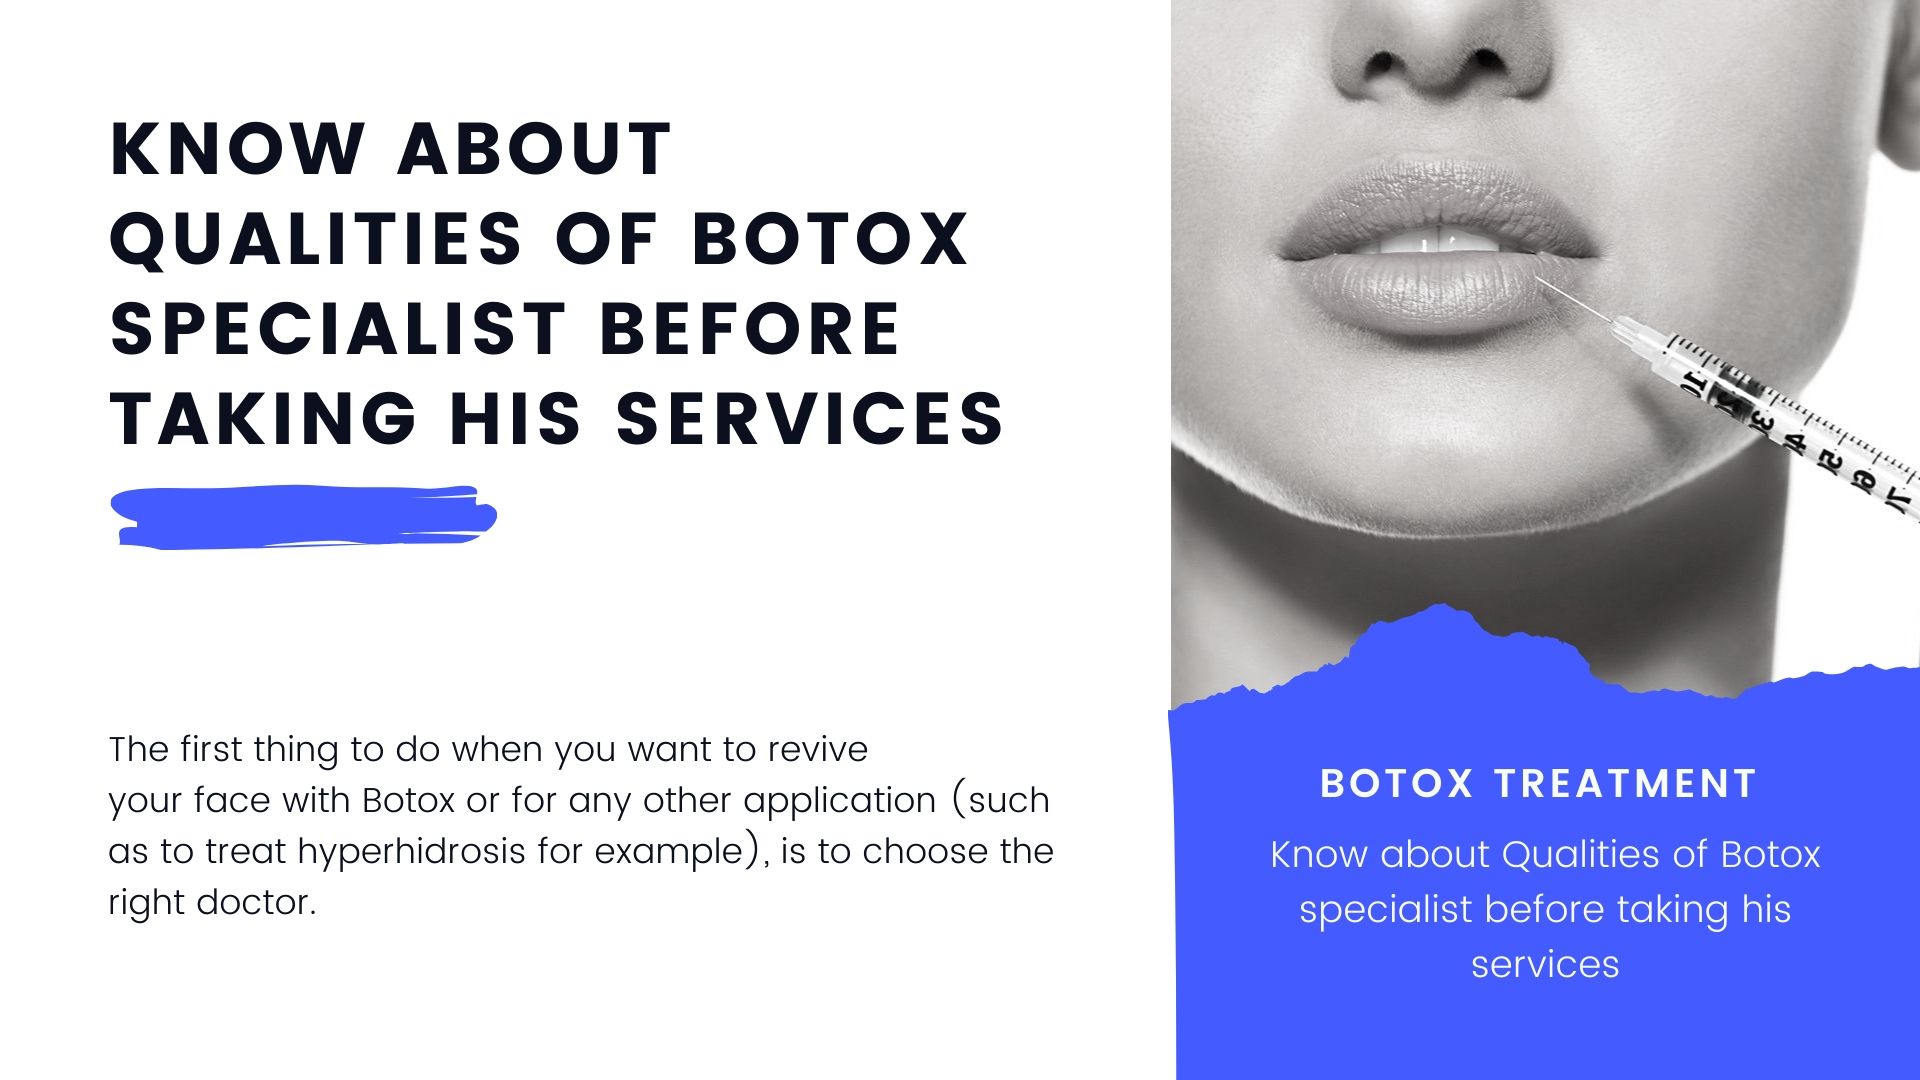 Know about Qualities of Botox Specialist before taking his Services